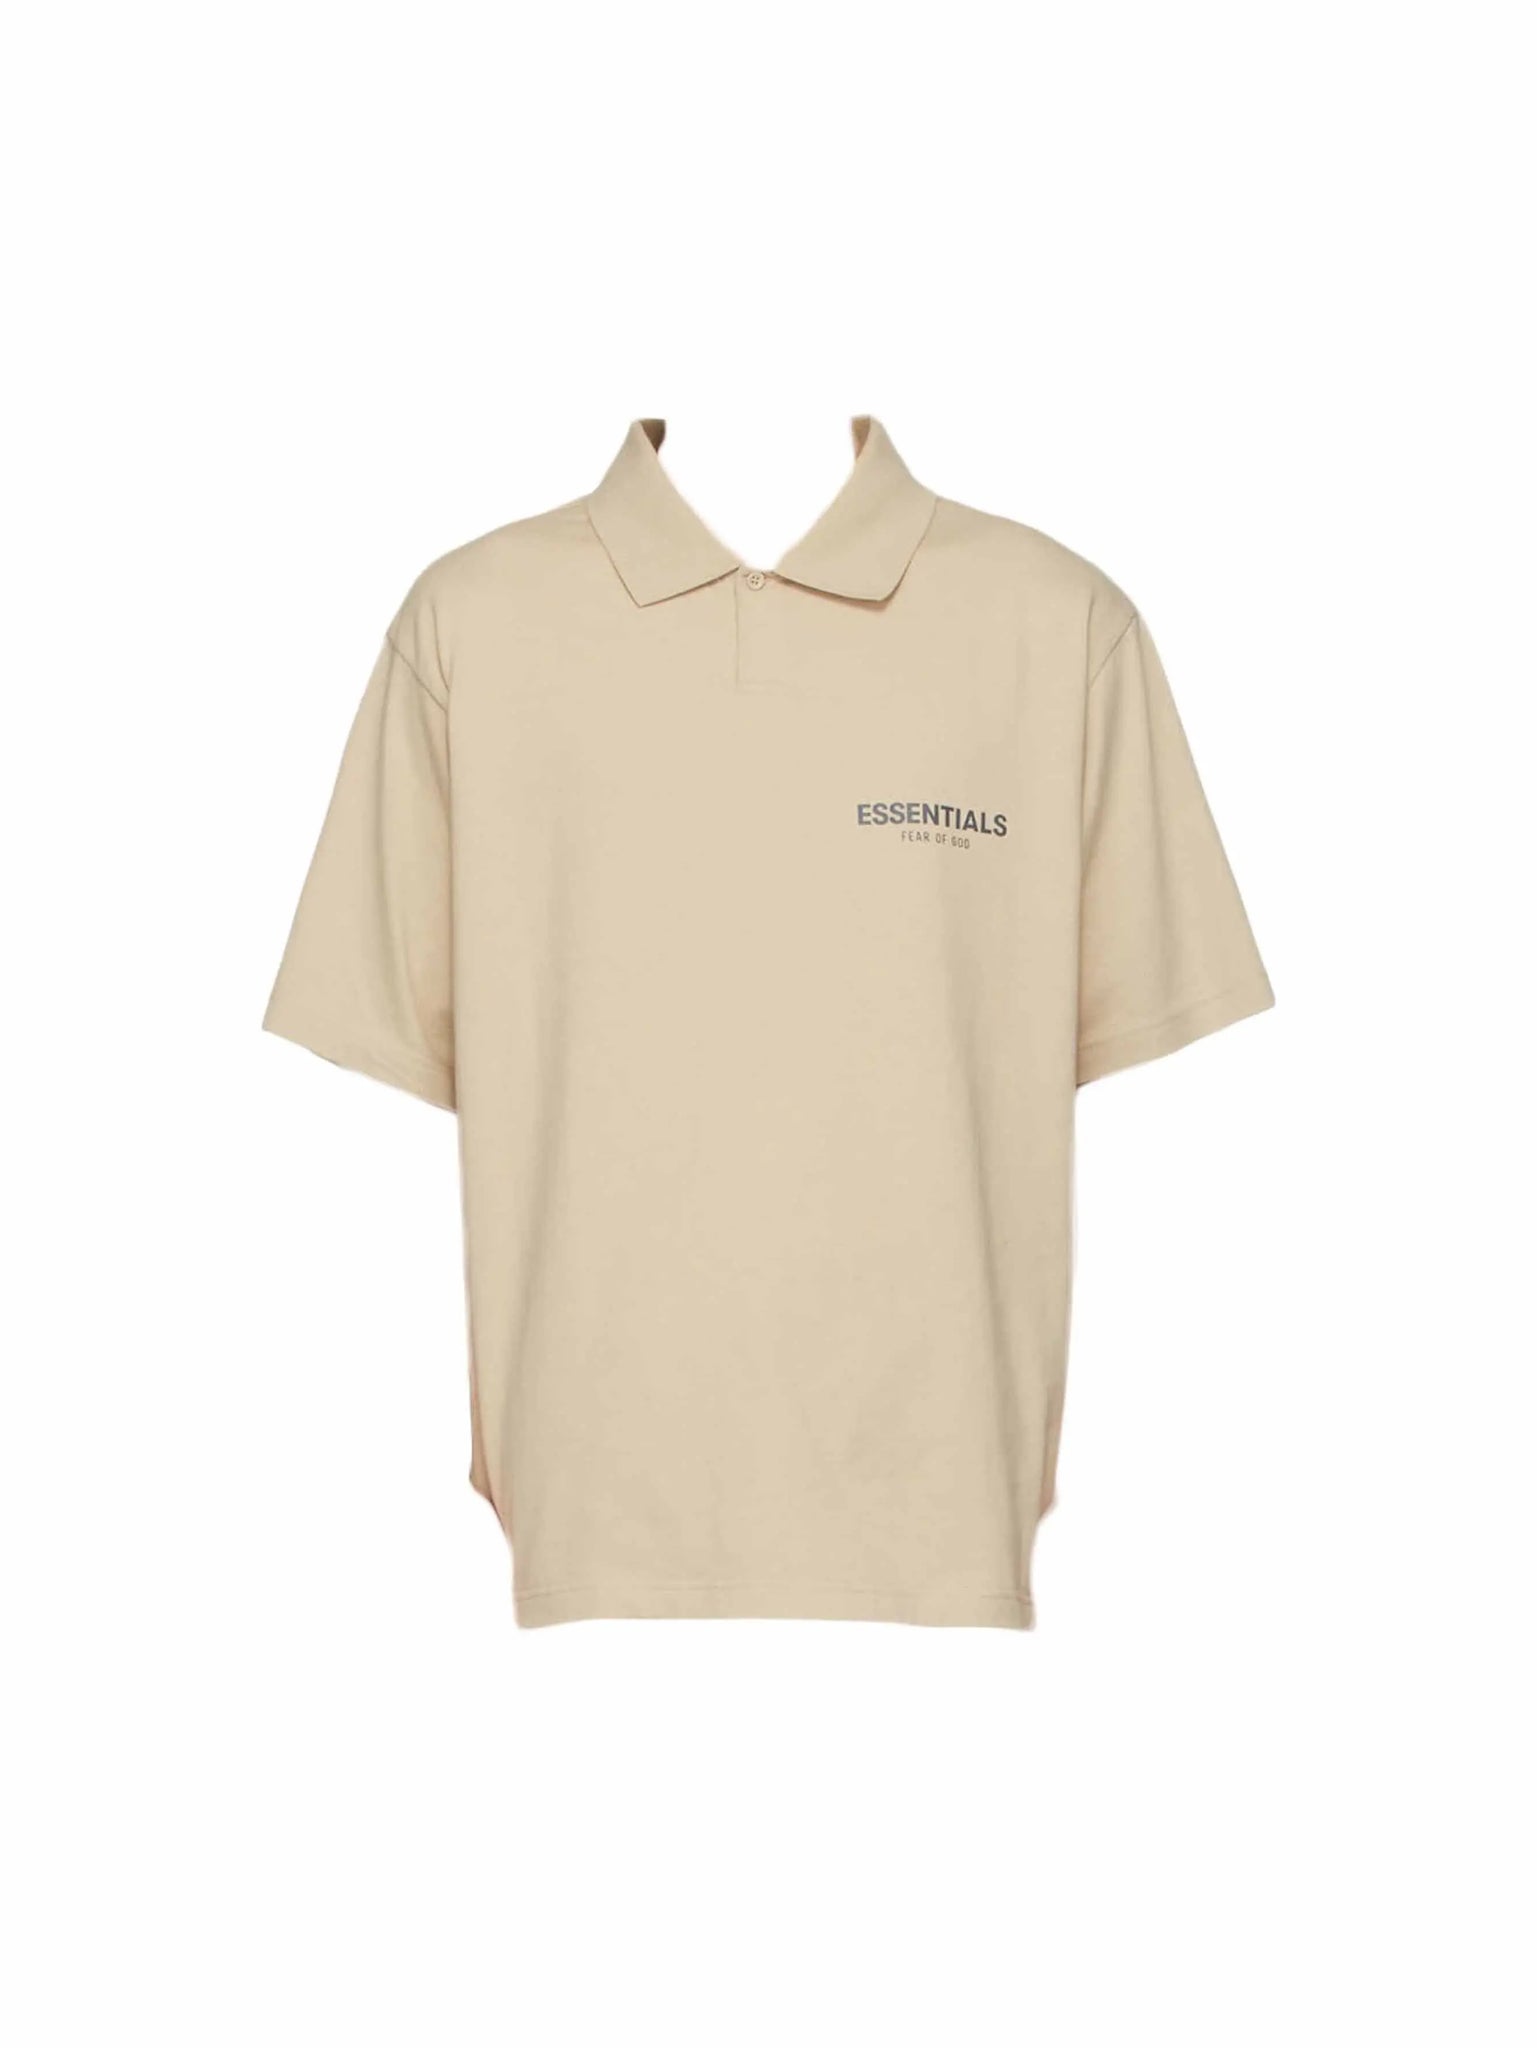 Fear of God Essentials SSENSE Exclusive Jersey Polo Linen in Auckland, New Zealand - Shop name